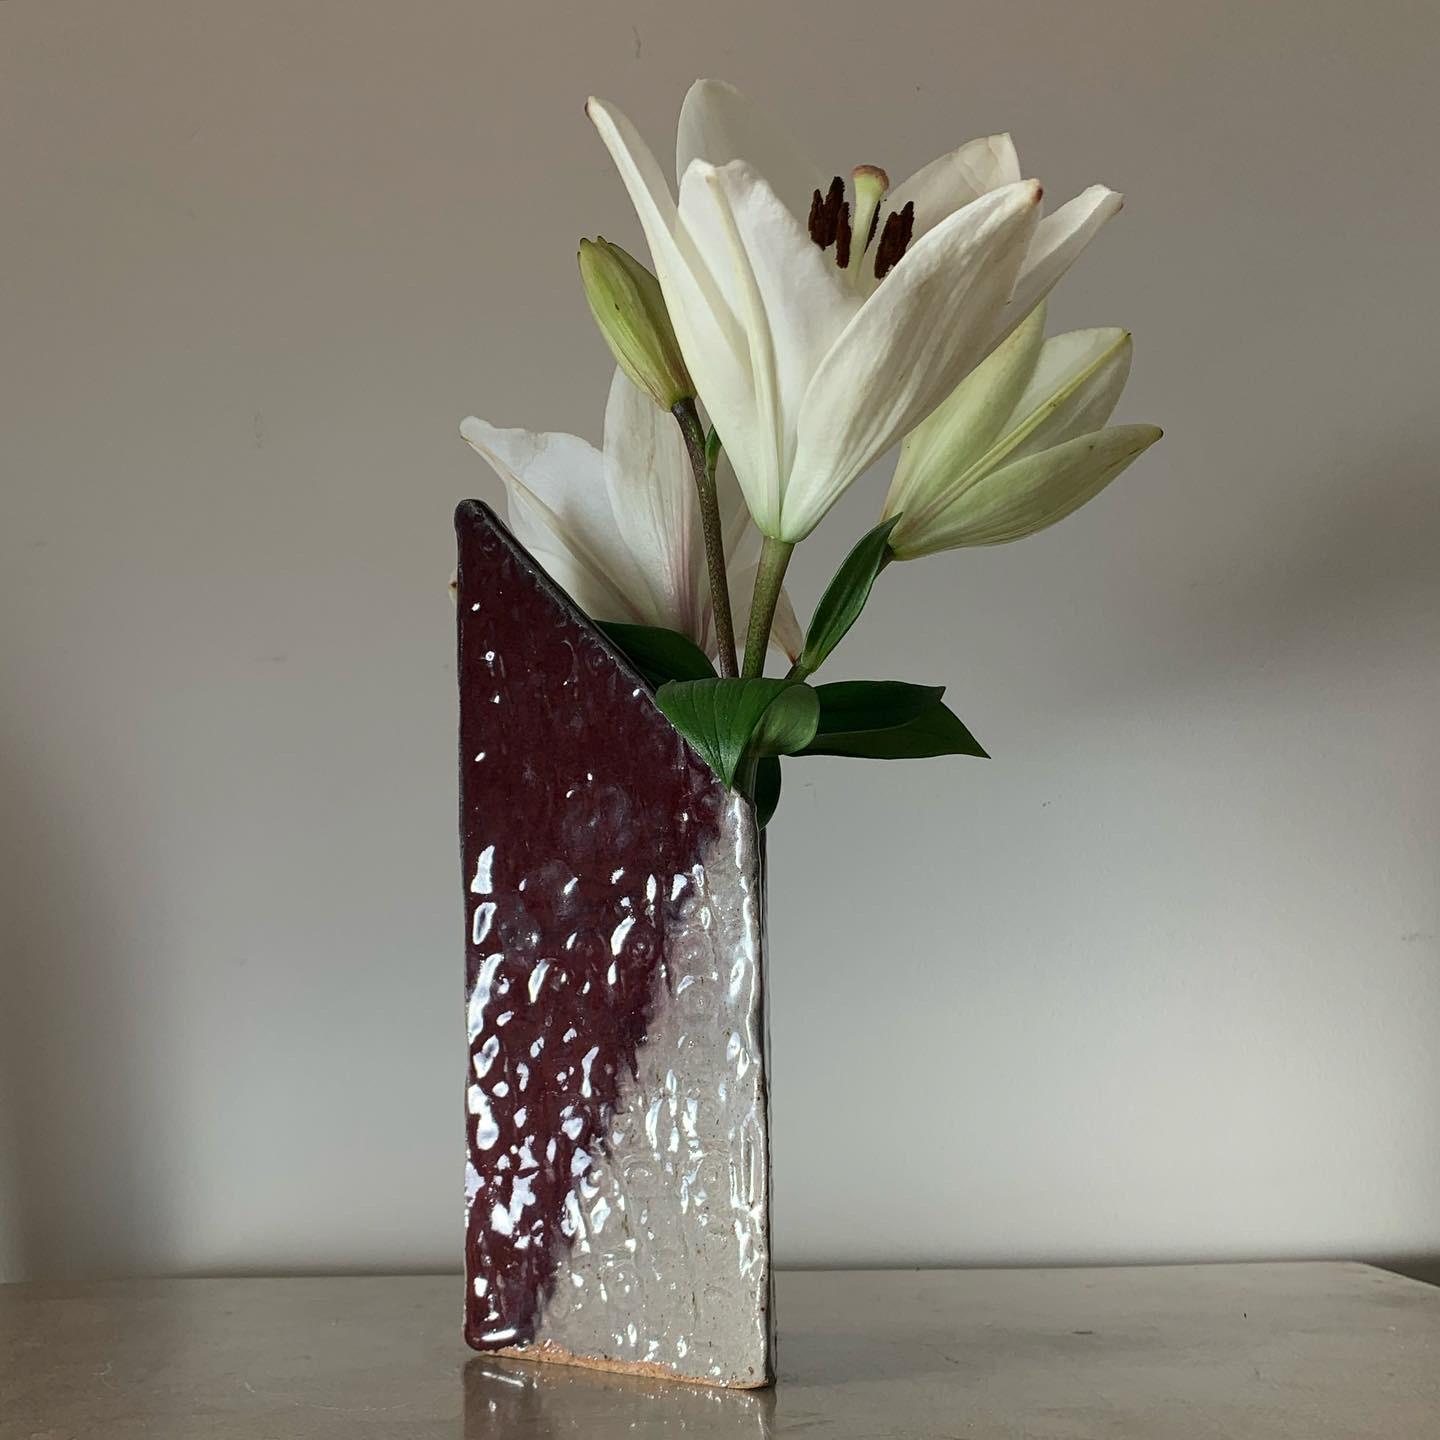 Bespoke mcm studio pottery vase ft. brutalist geometry. Ceramic glazed; dove gray and oxblood/aubergine. Circa late 70s. Pick up in LA or delivery options avail 

Measures: 10” tall.